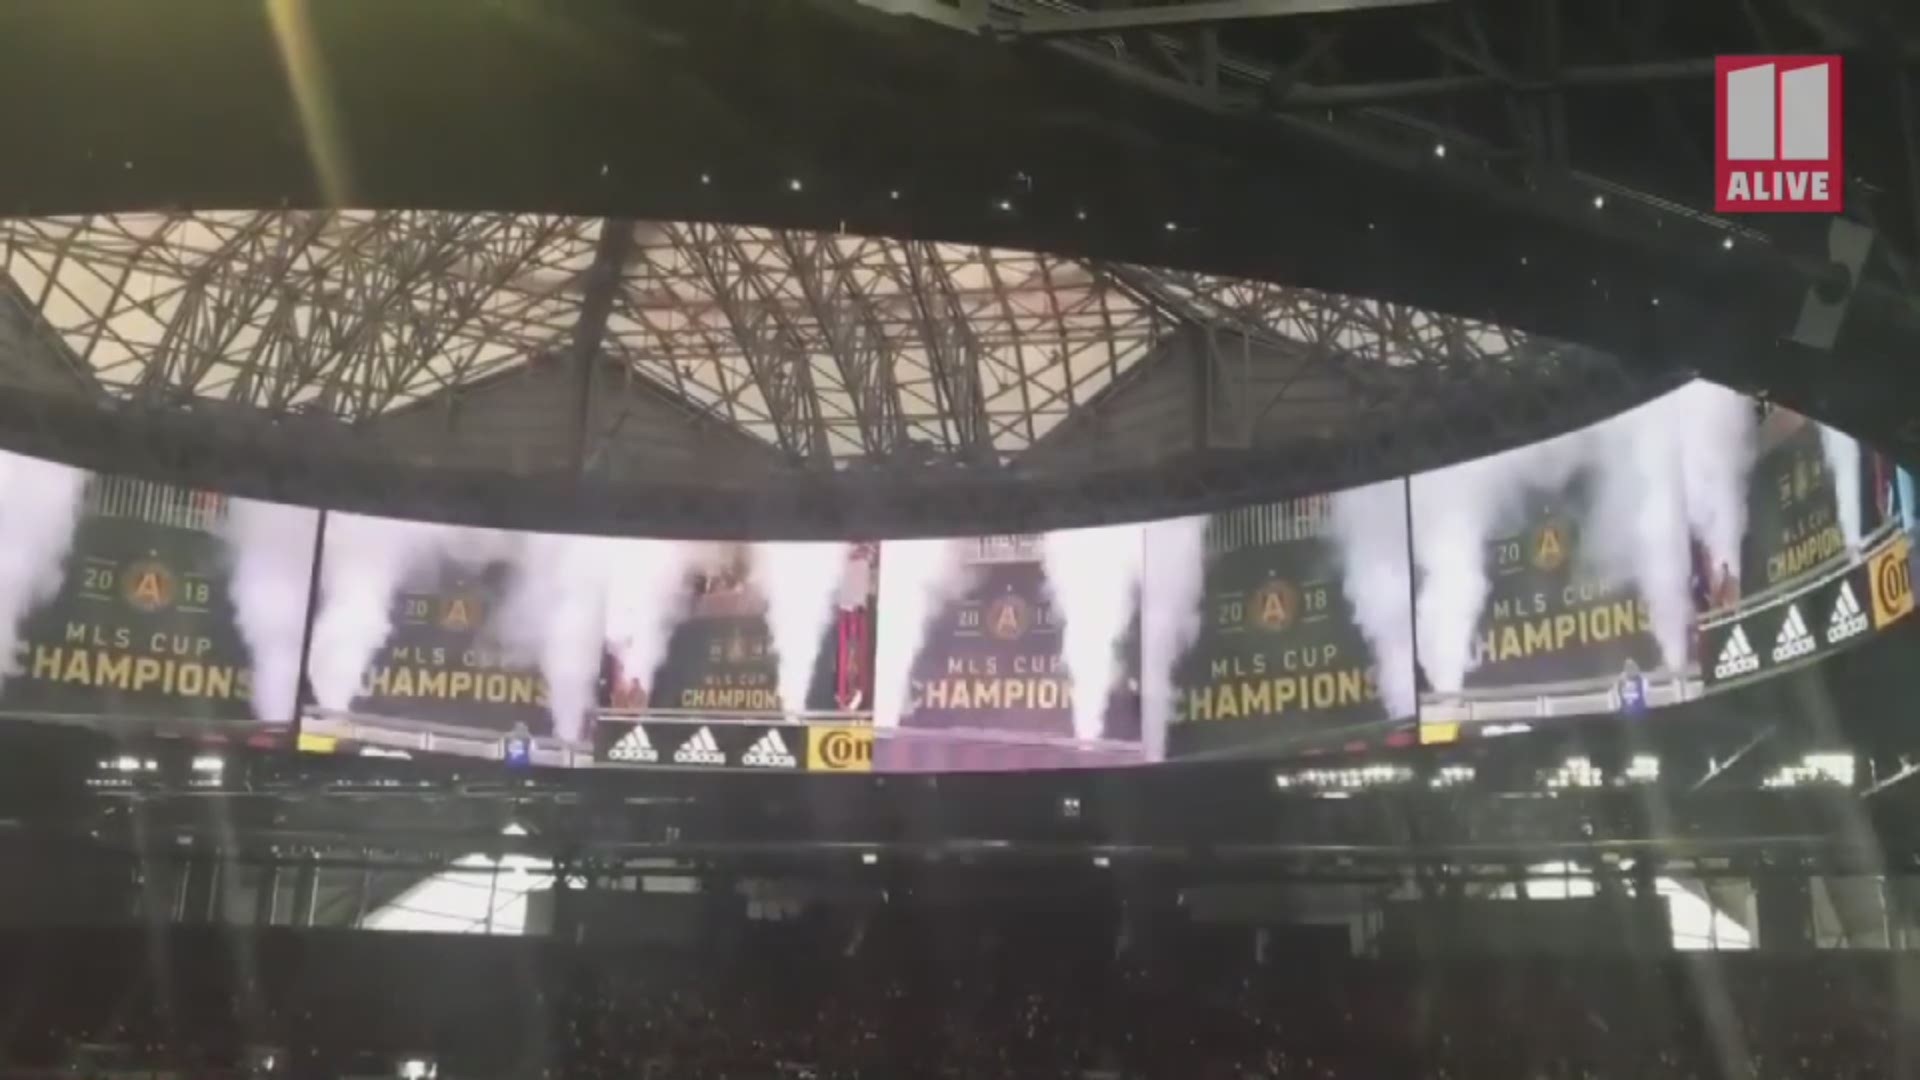 The team revealed the new banner during their home opener, March 10.